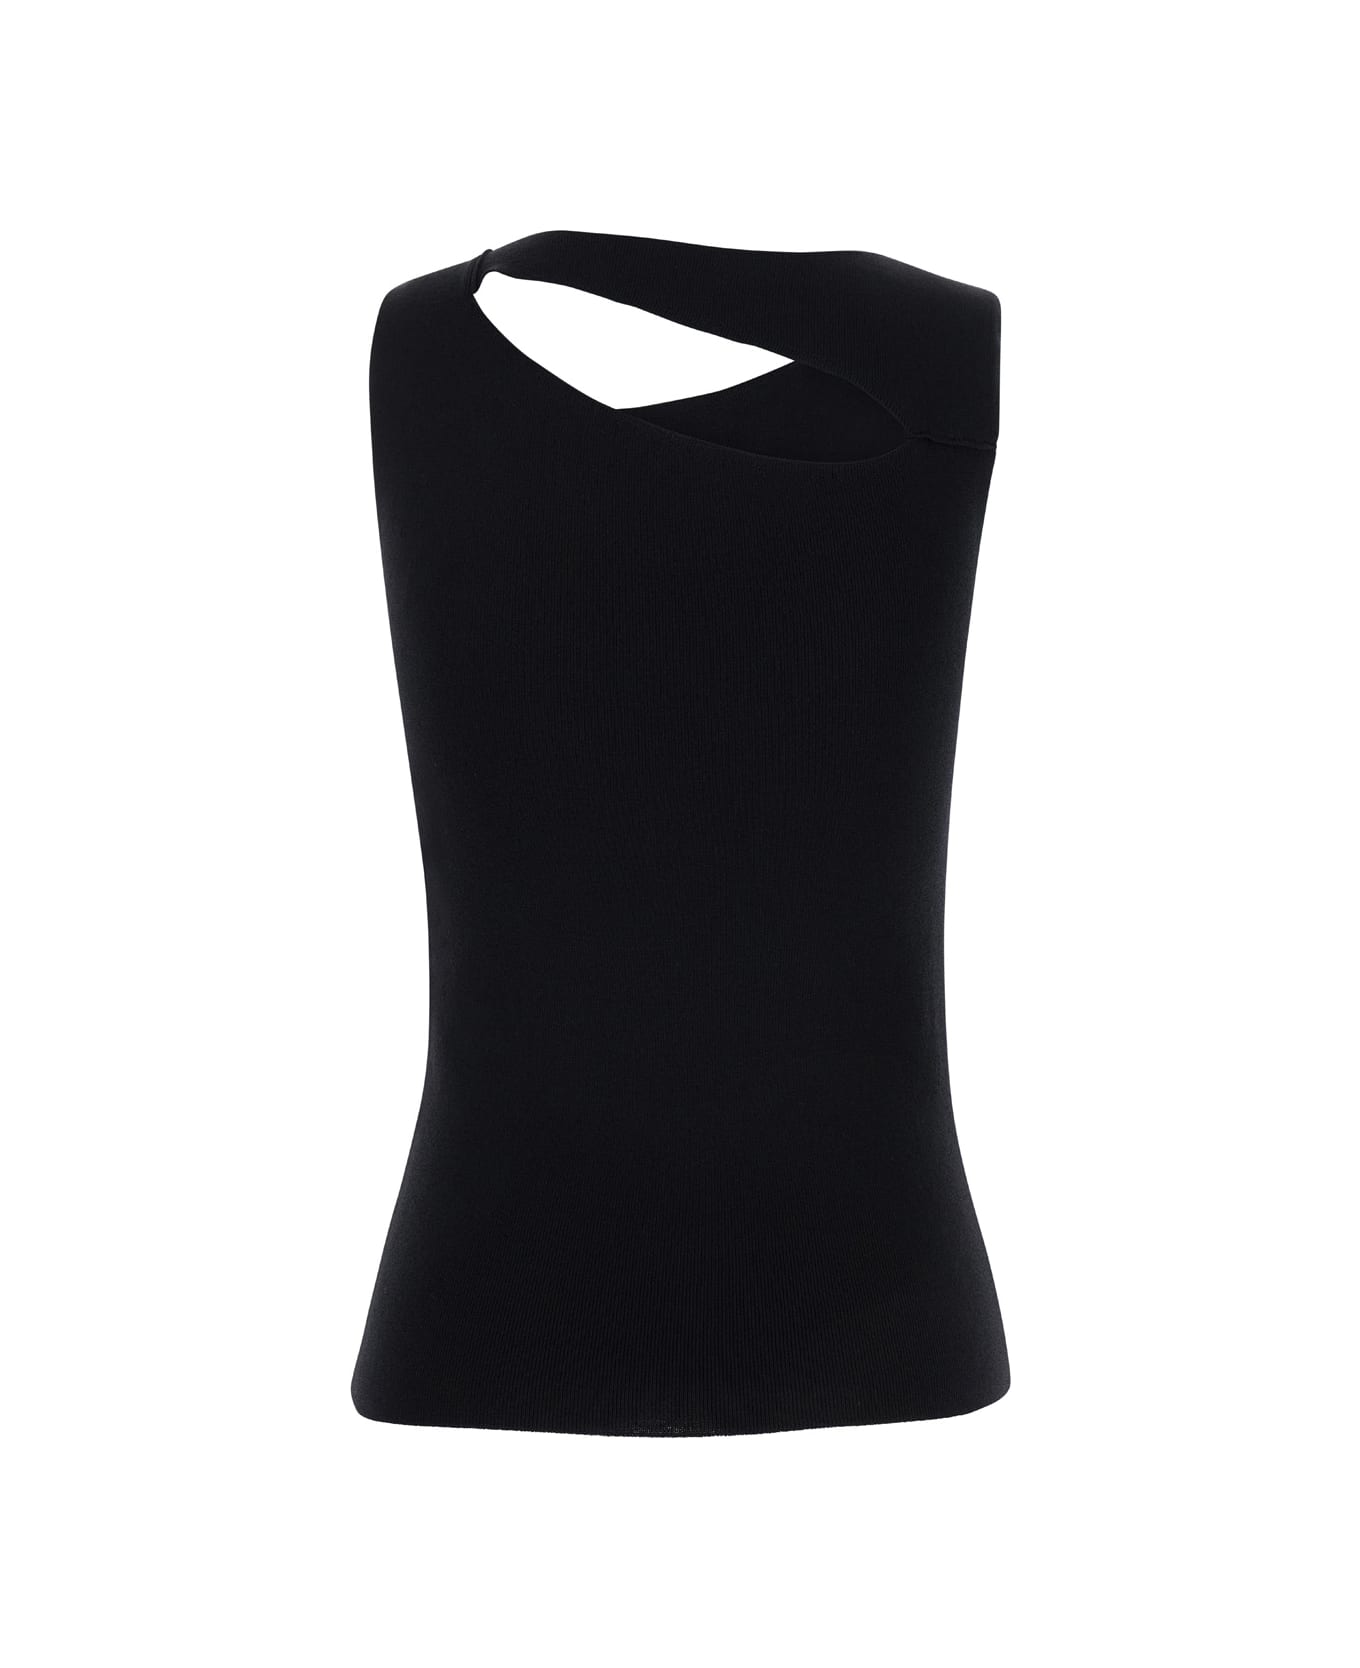 SEMICOUTURE Black Sleeveless Top With Cut-out At The Front And Back In Viscose Blend Woman - Black タンクトップ